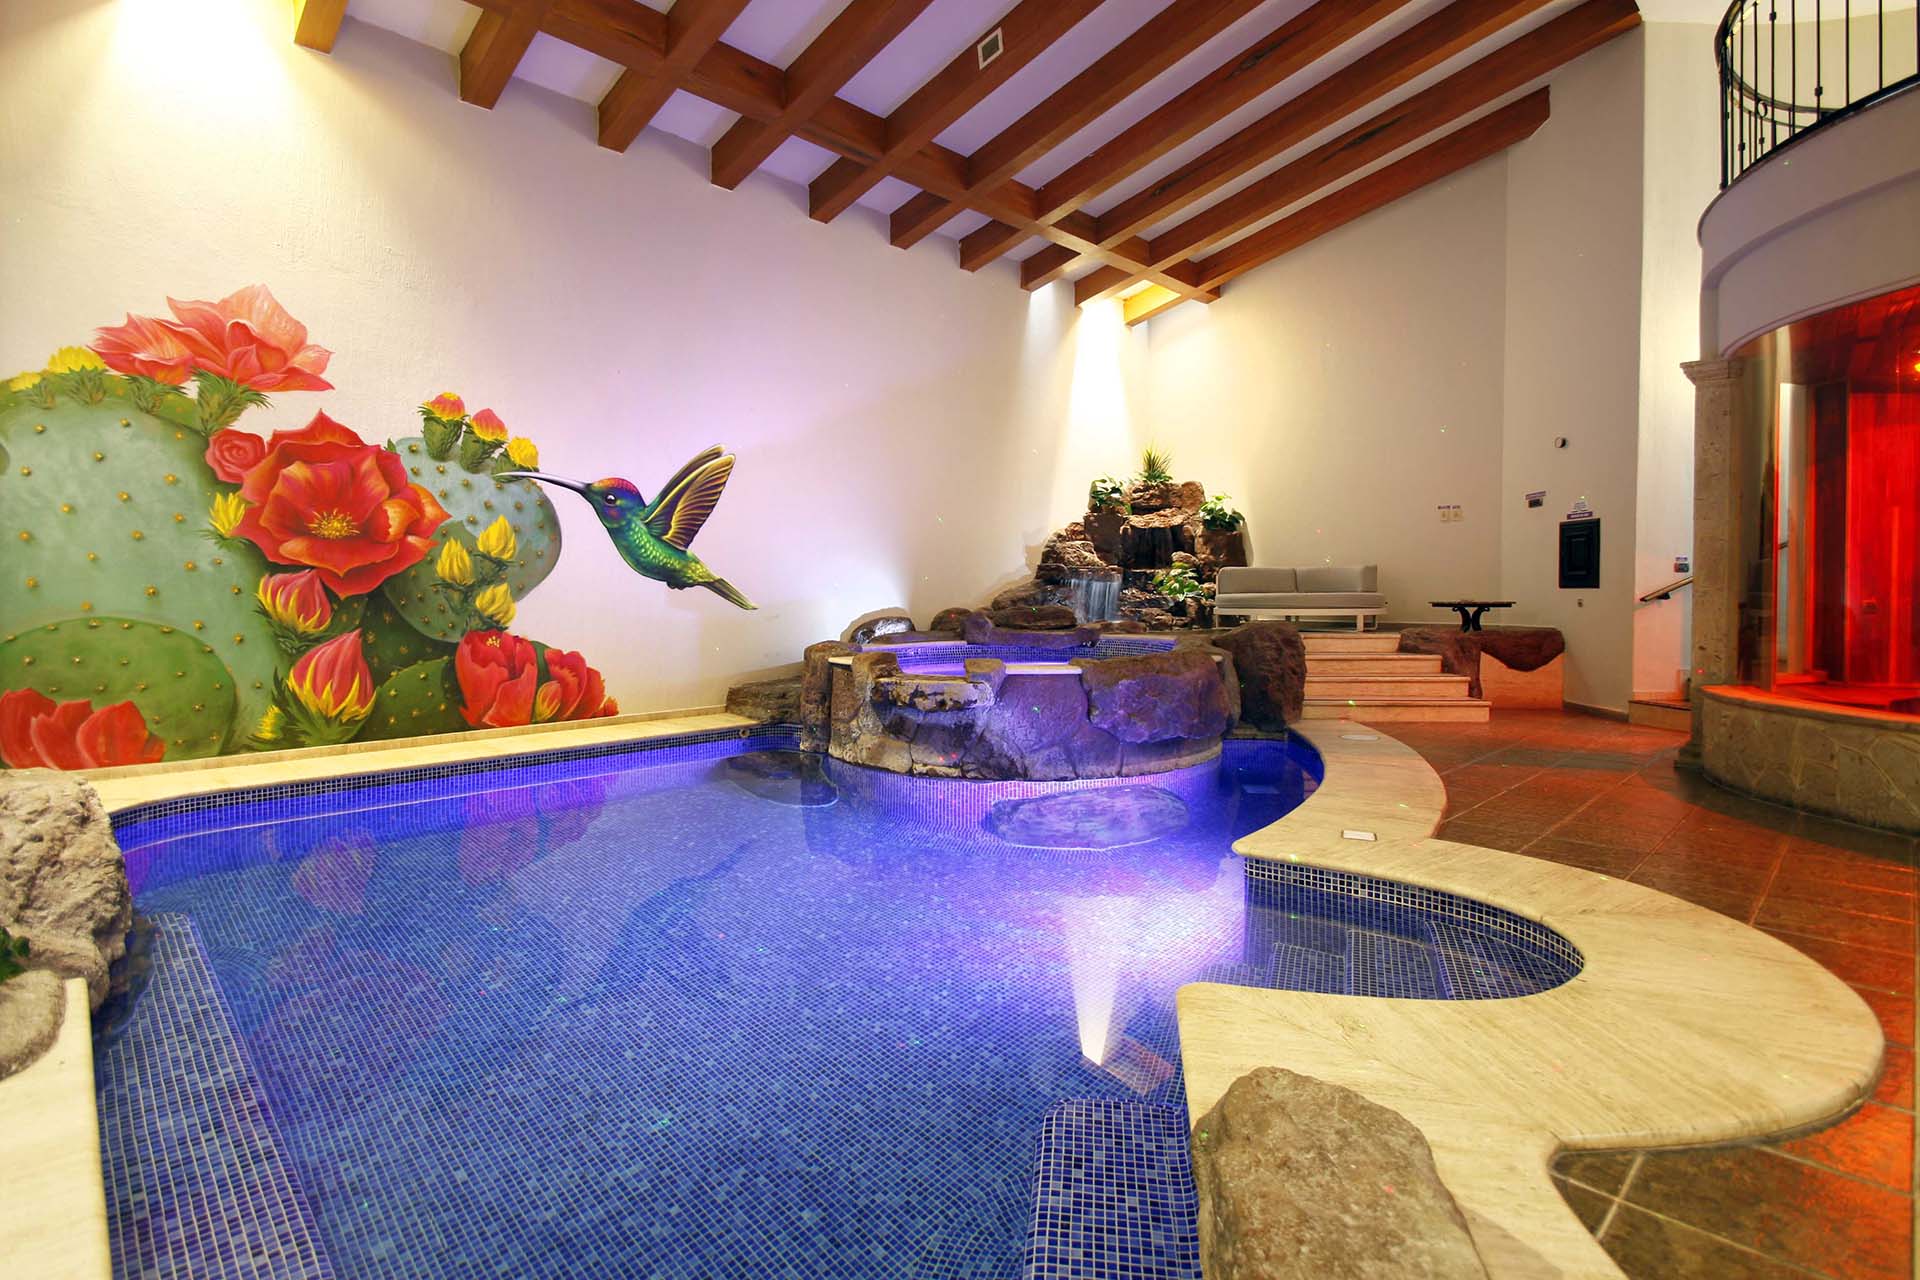 REAL SUITE Thematic, Pool, Jacuzzi$ 3,500 M.N.